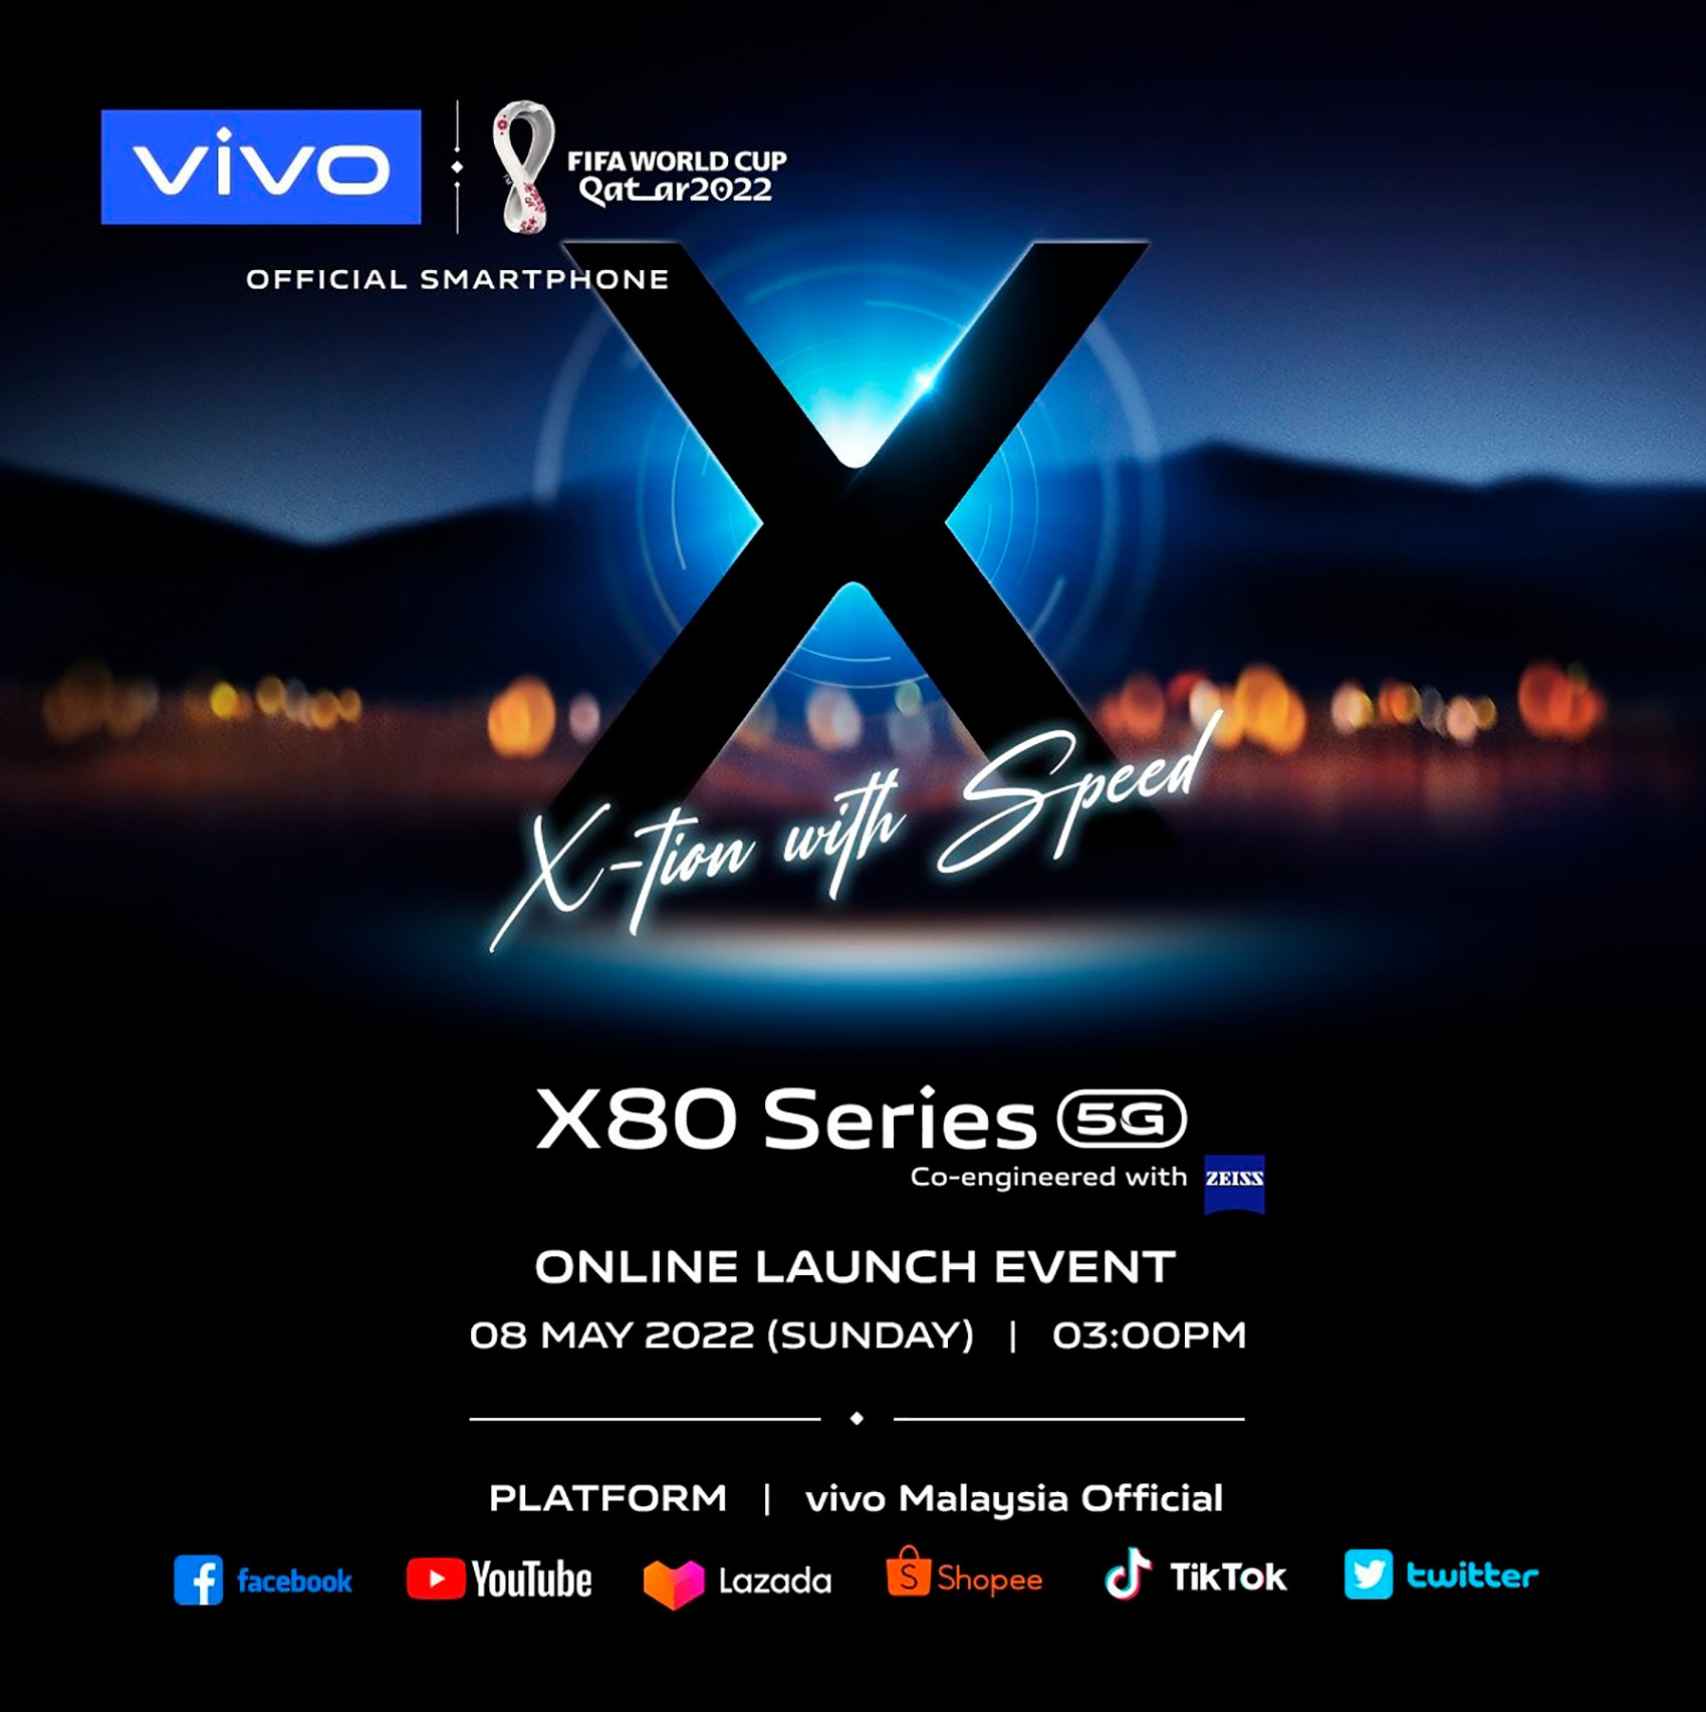 Vivo X80 will be launched internationally